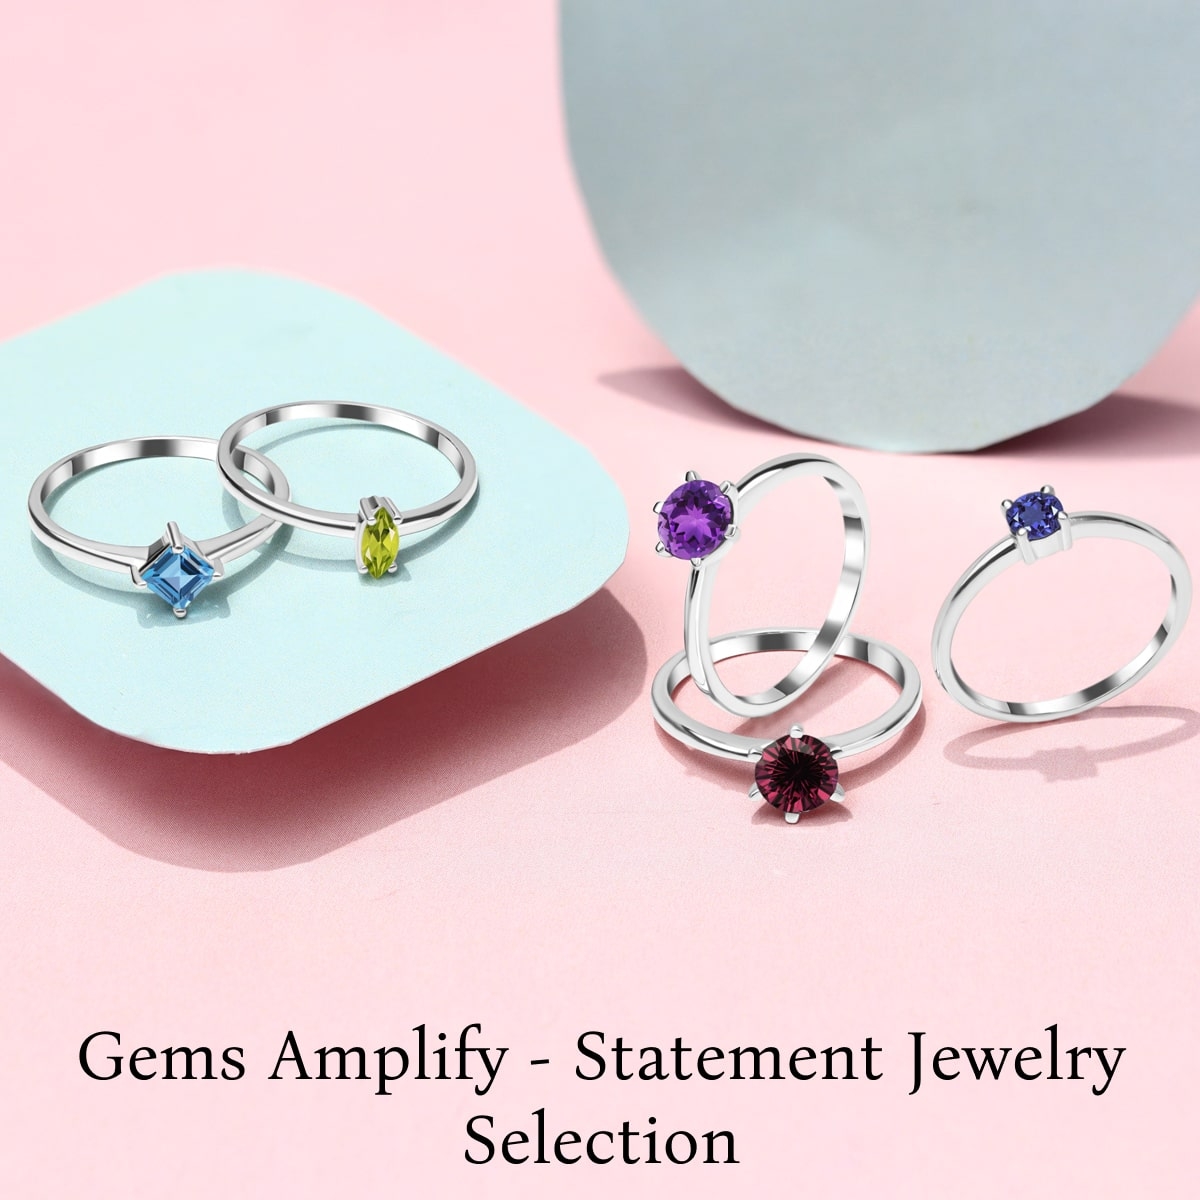 Gemstones that work well as the statement jewelry